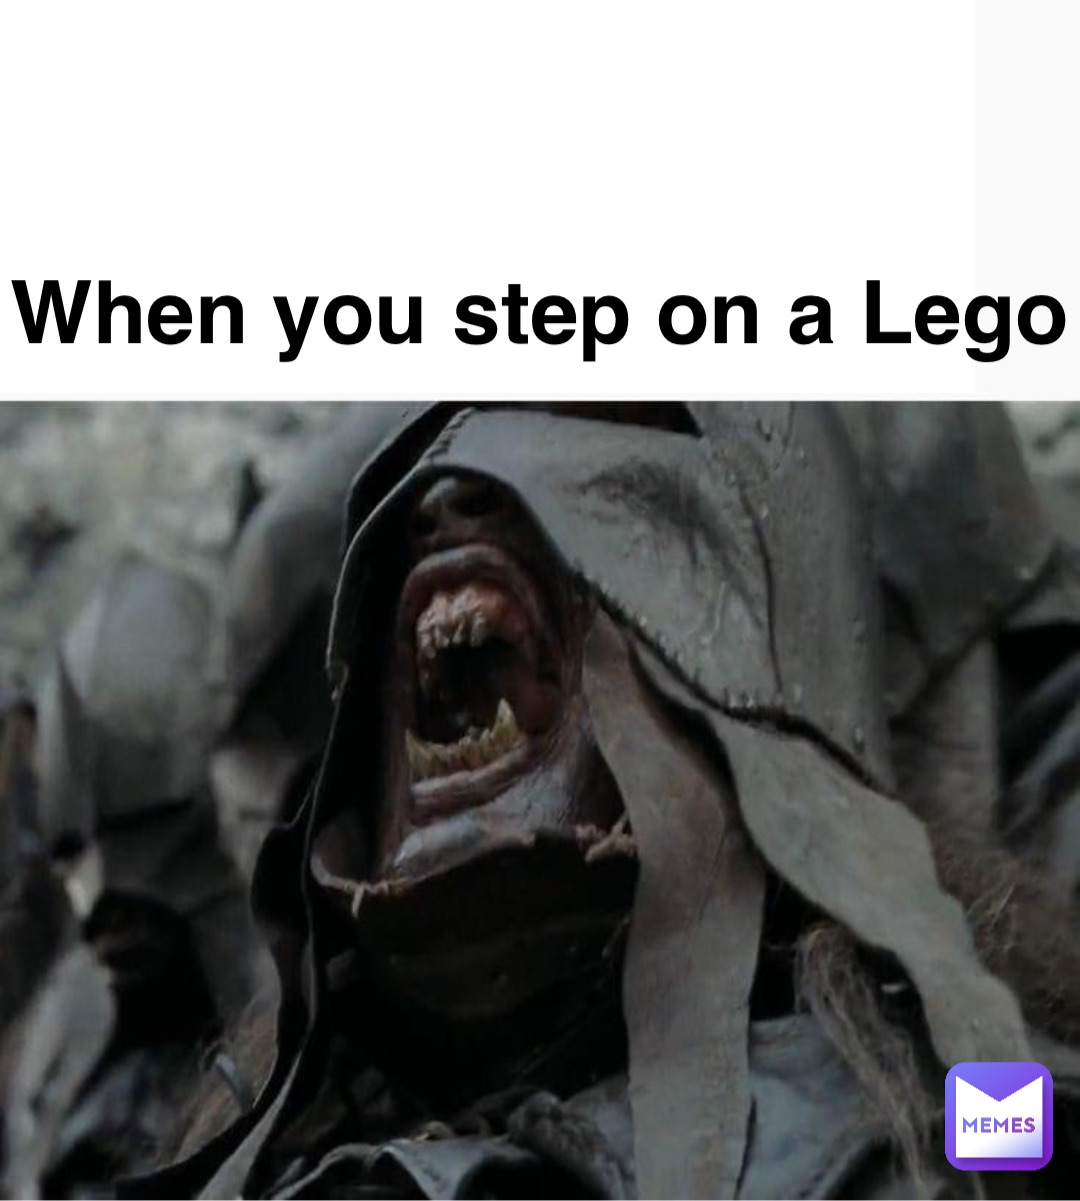 When you step on a Lego